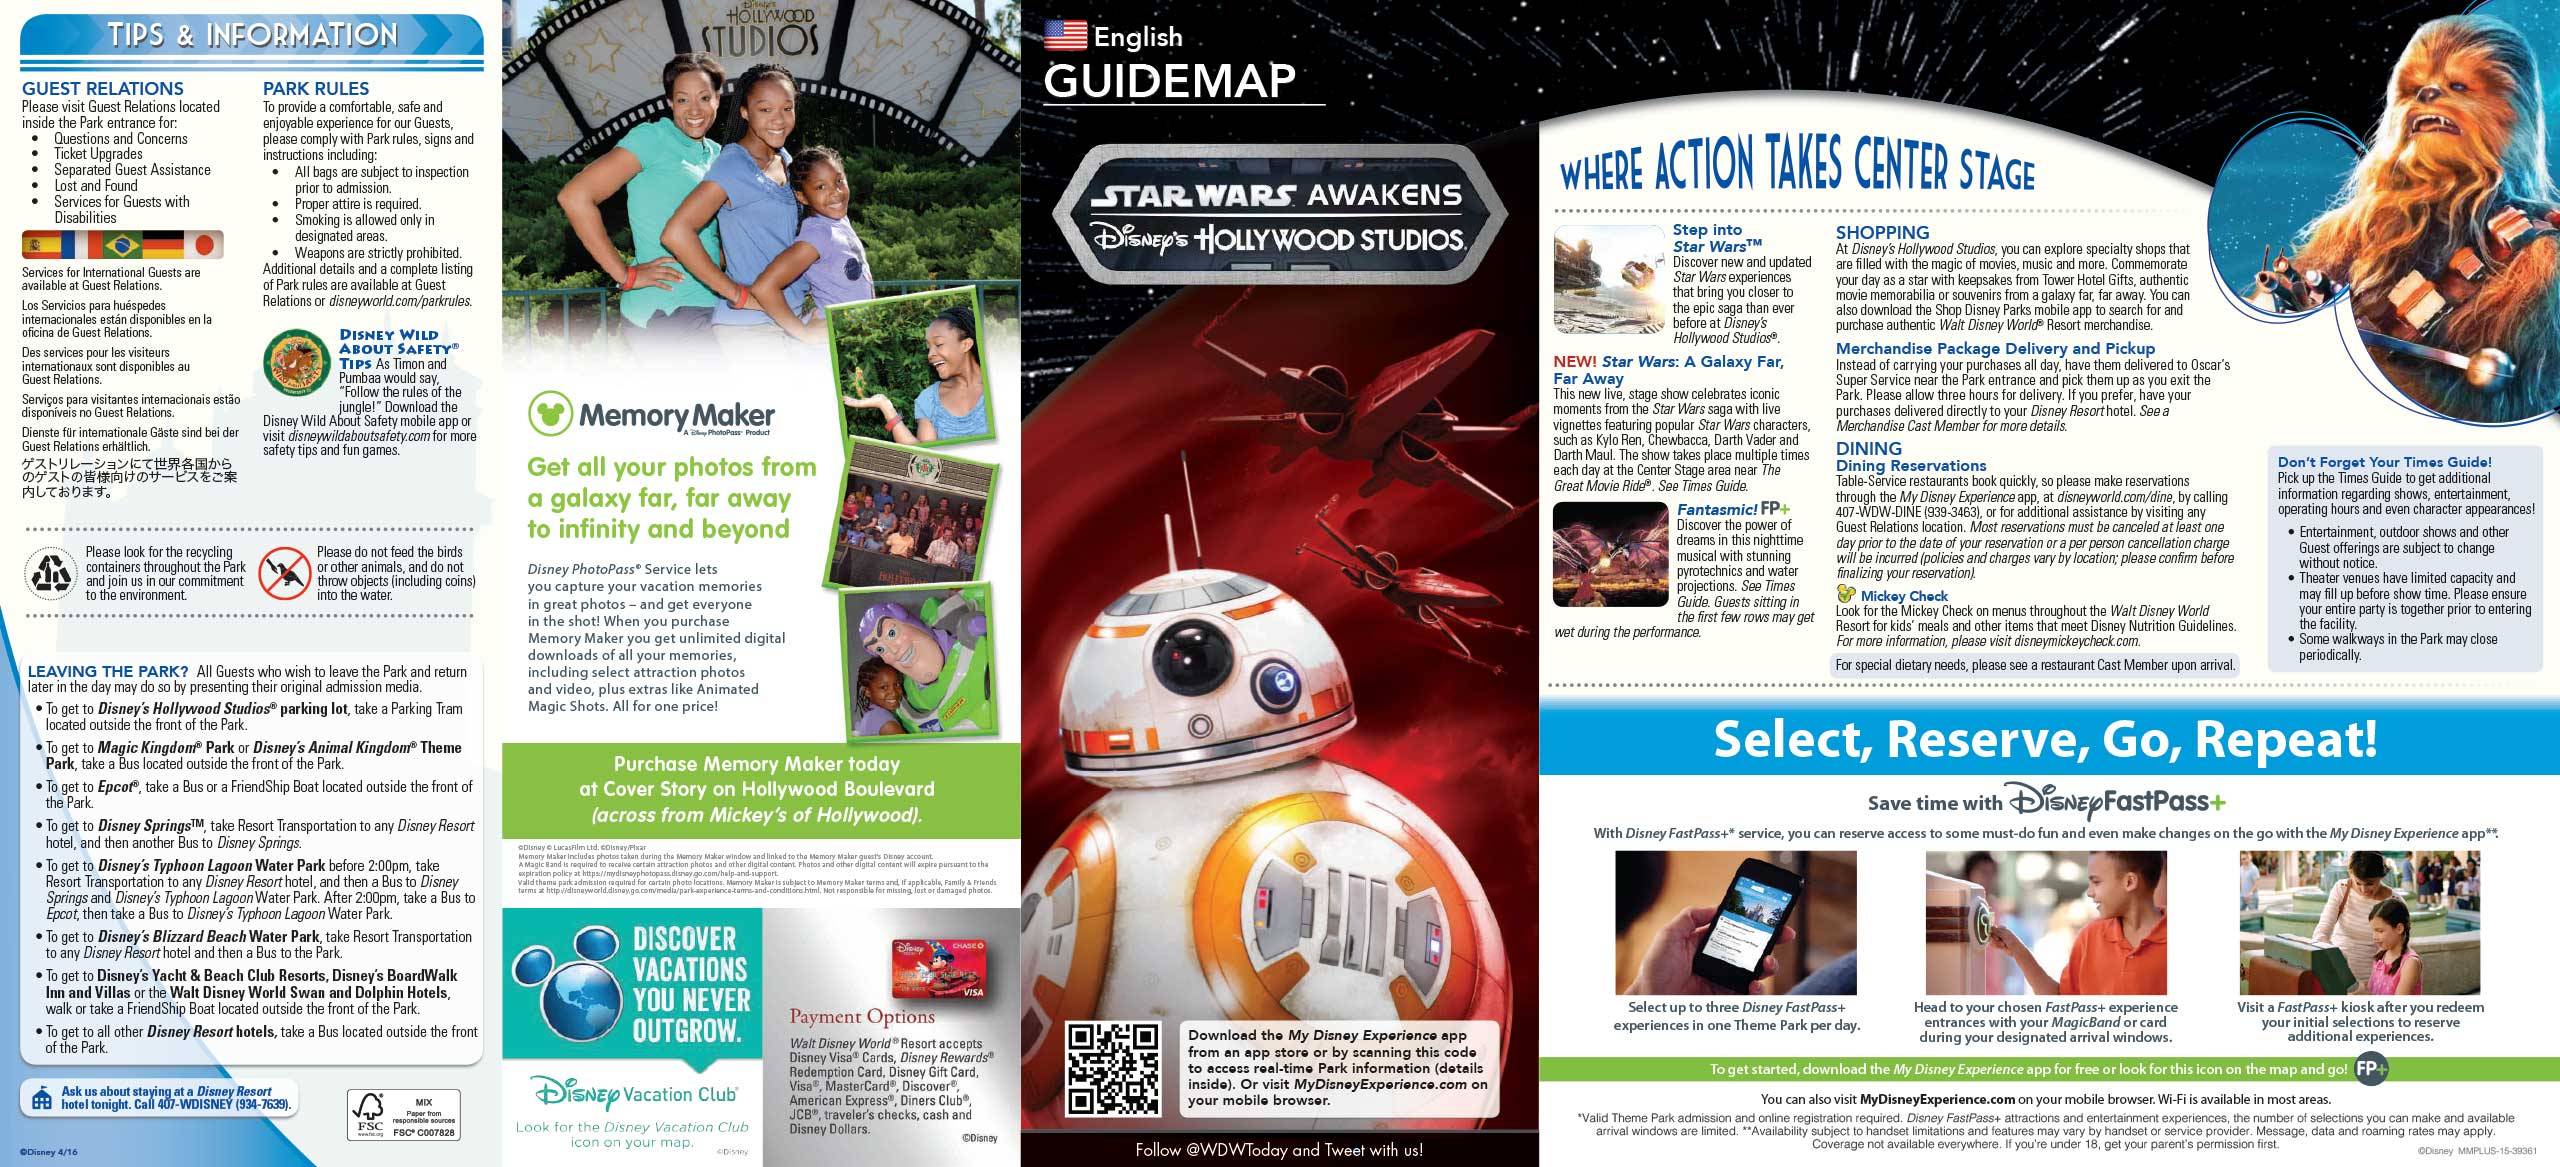 April 2016 Disney's Hollywood Studios guide map with backlot area removed